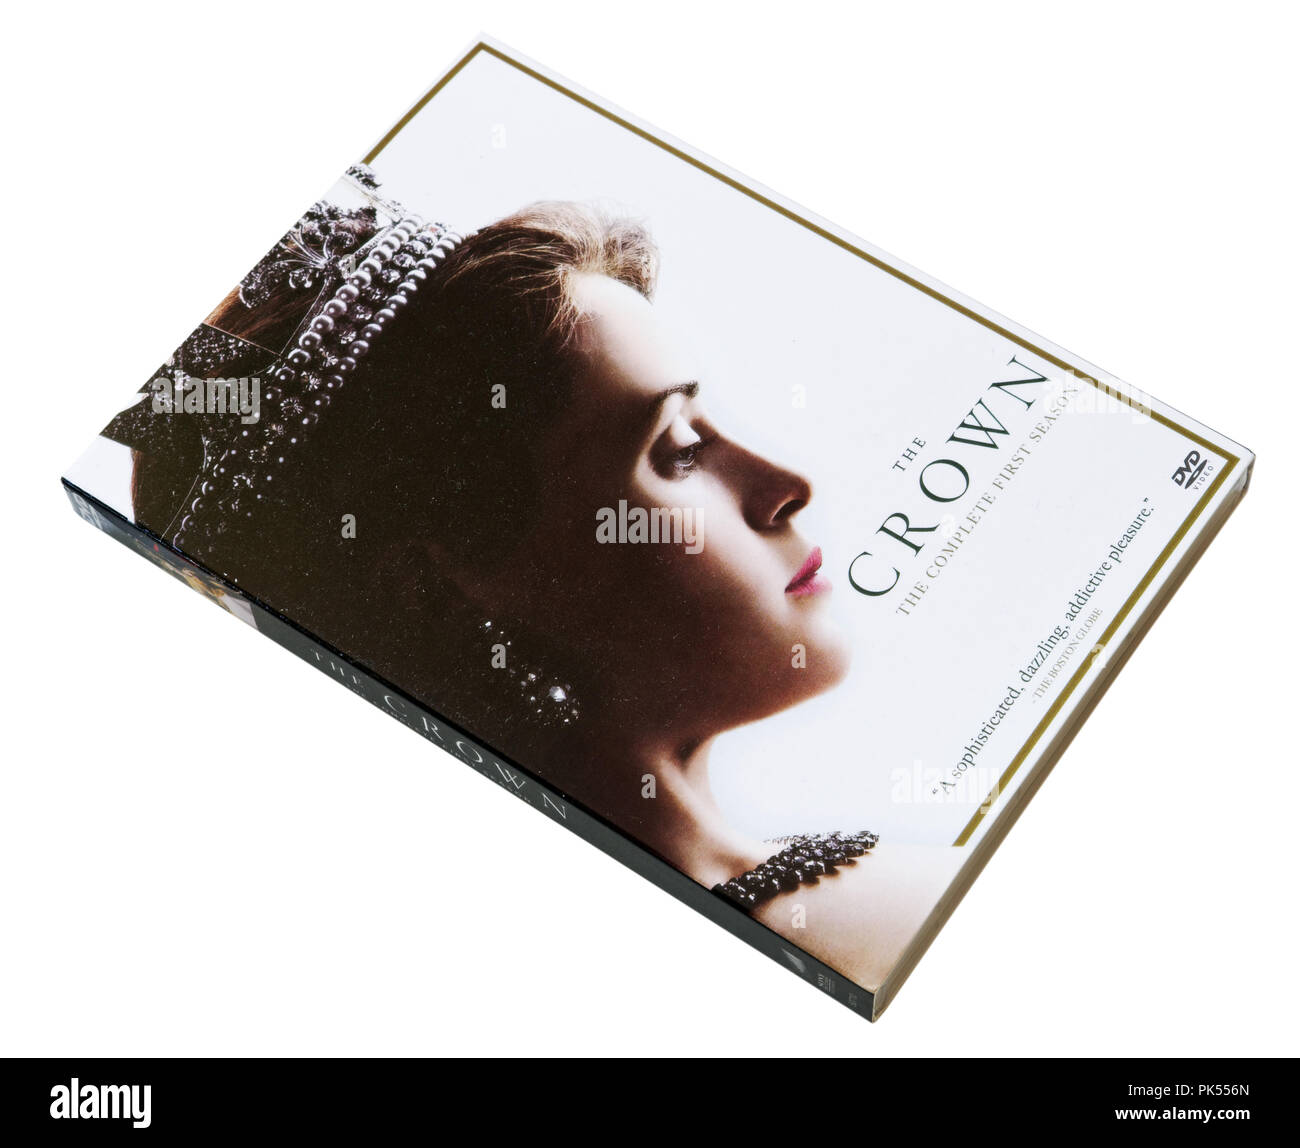 The Crown series DVD Stock Photo